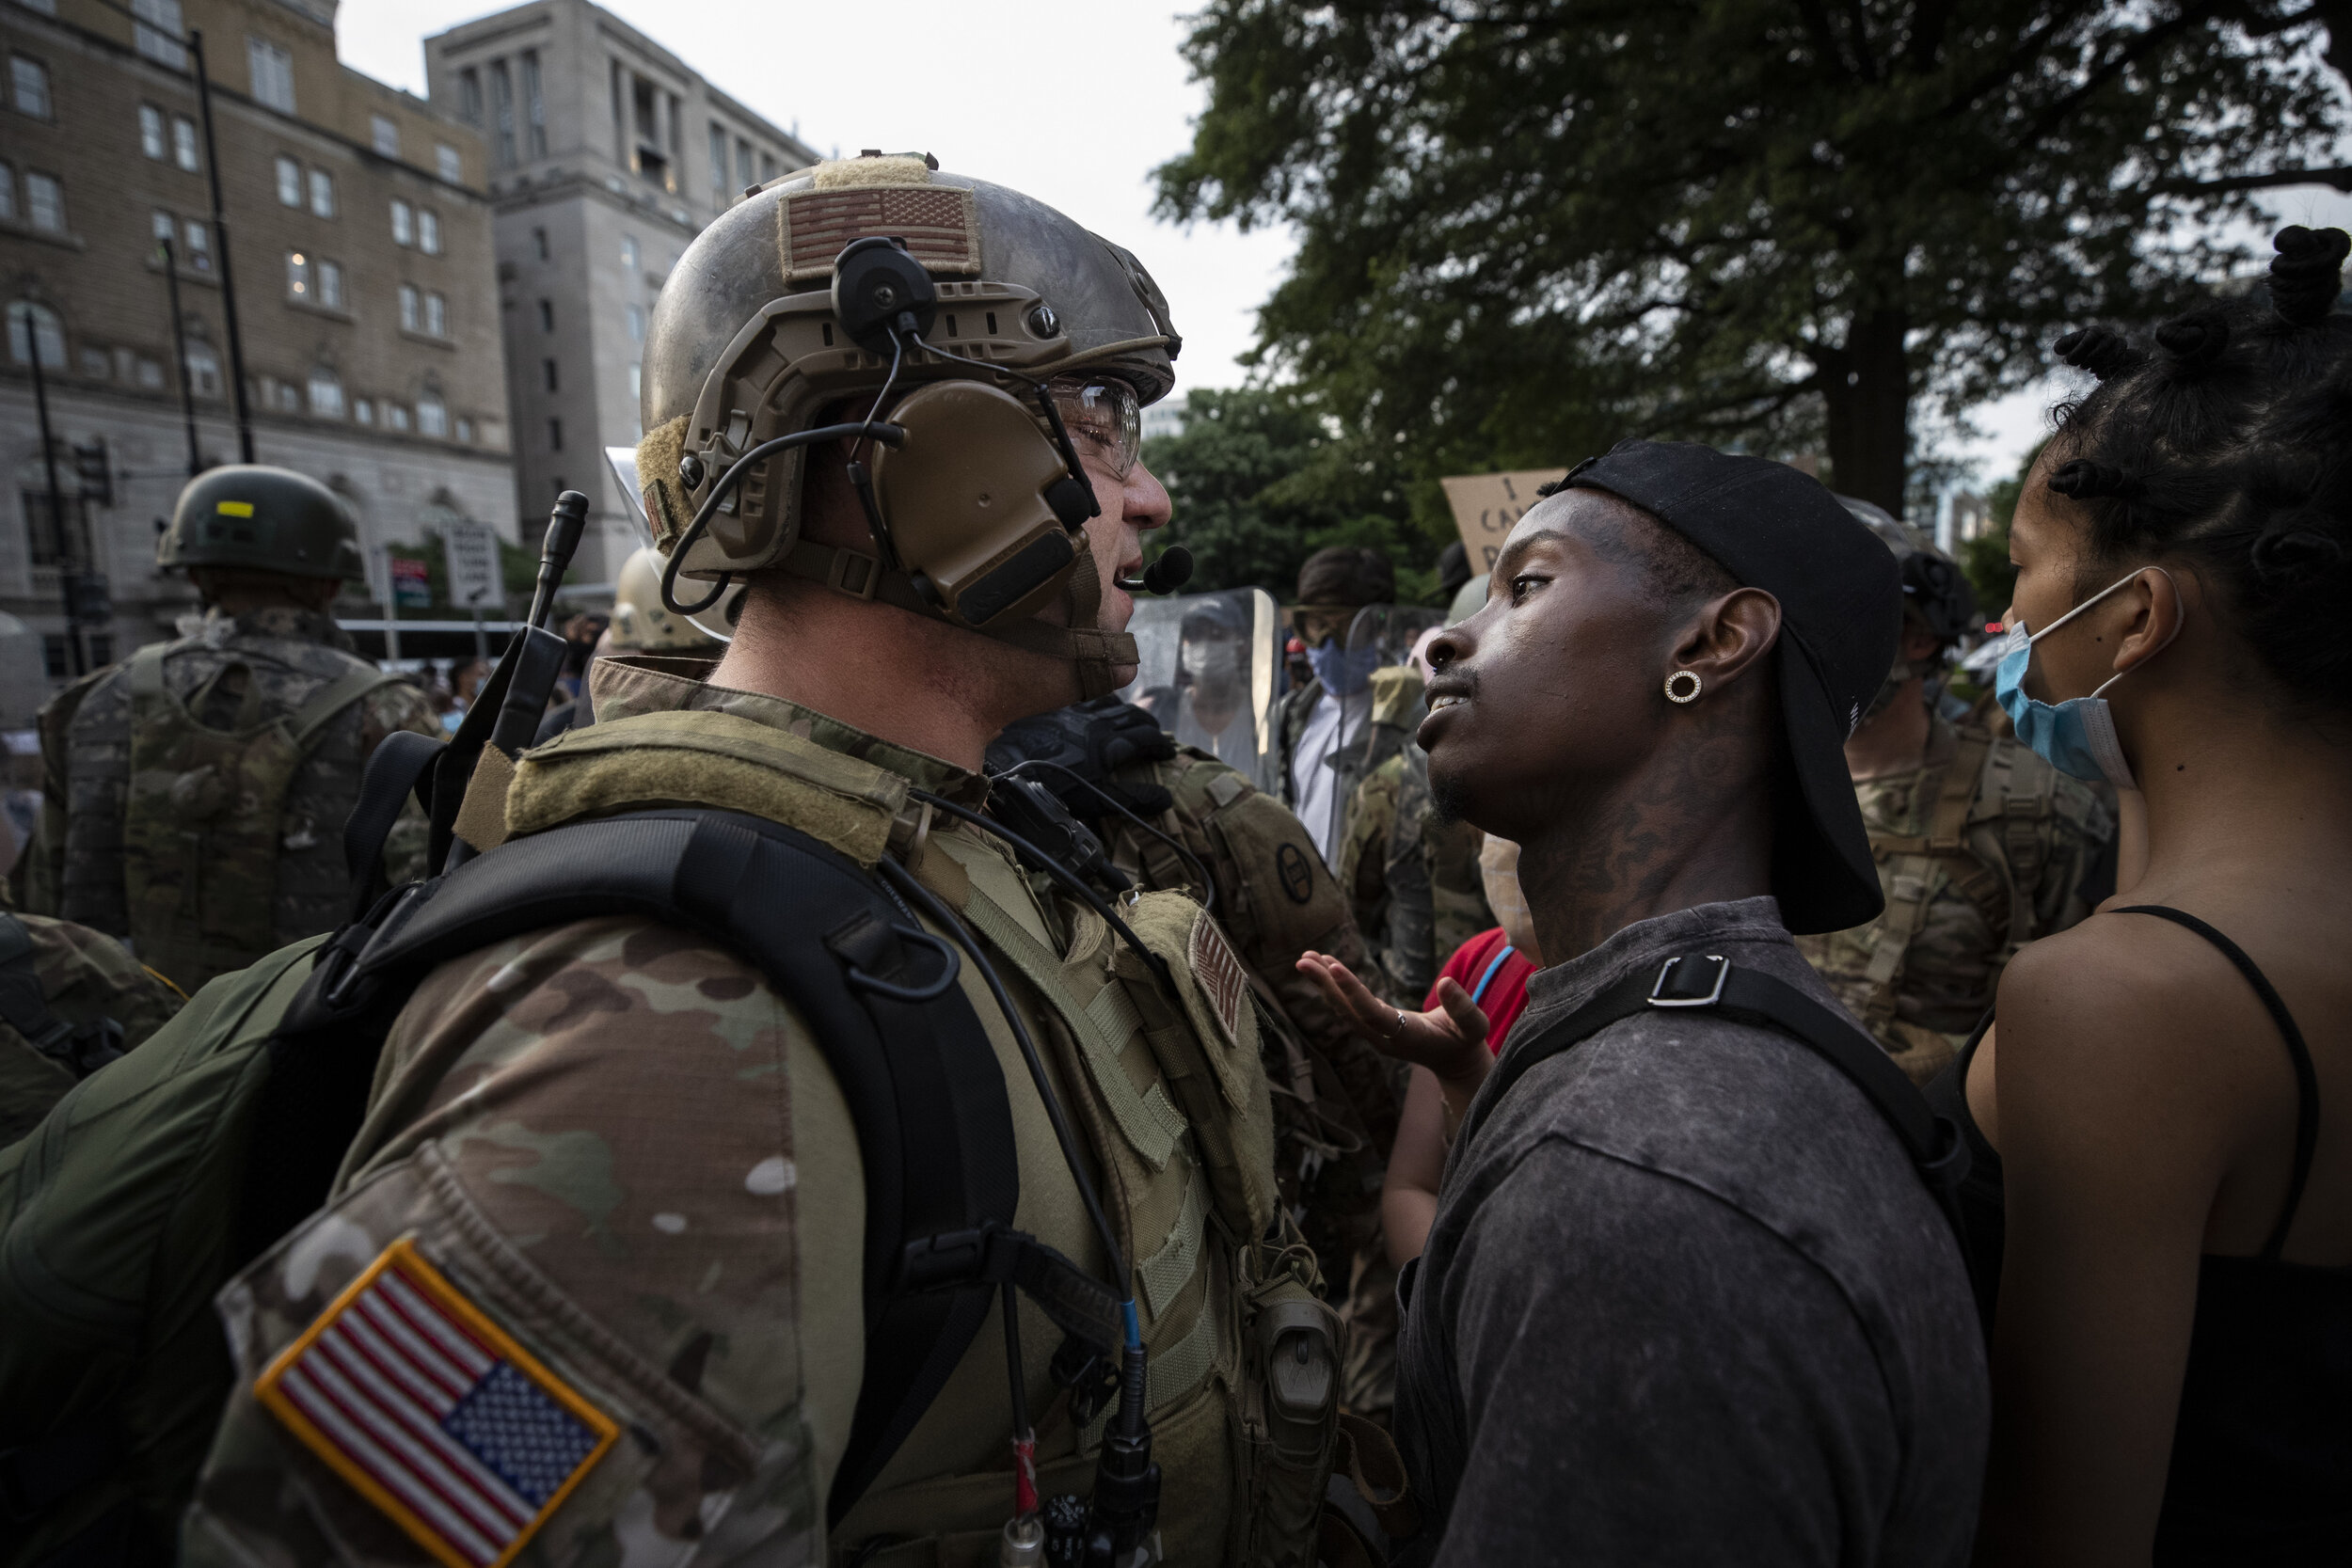  A demonstrator stares at a National Guard solider as protests continue over the death of George Floyd, June 3, 2020, near the White House in Washington, D.C. (AP Photo/Alex Brandon) 